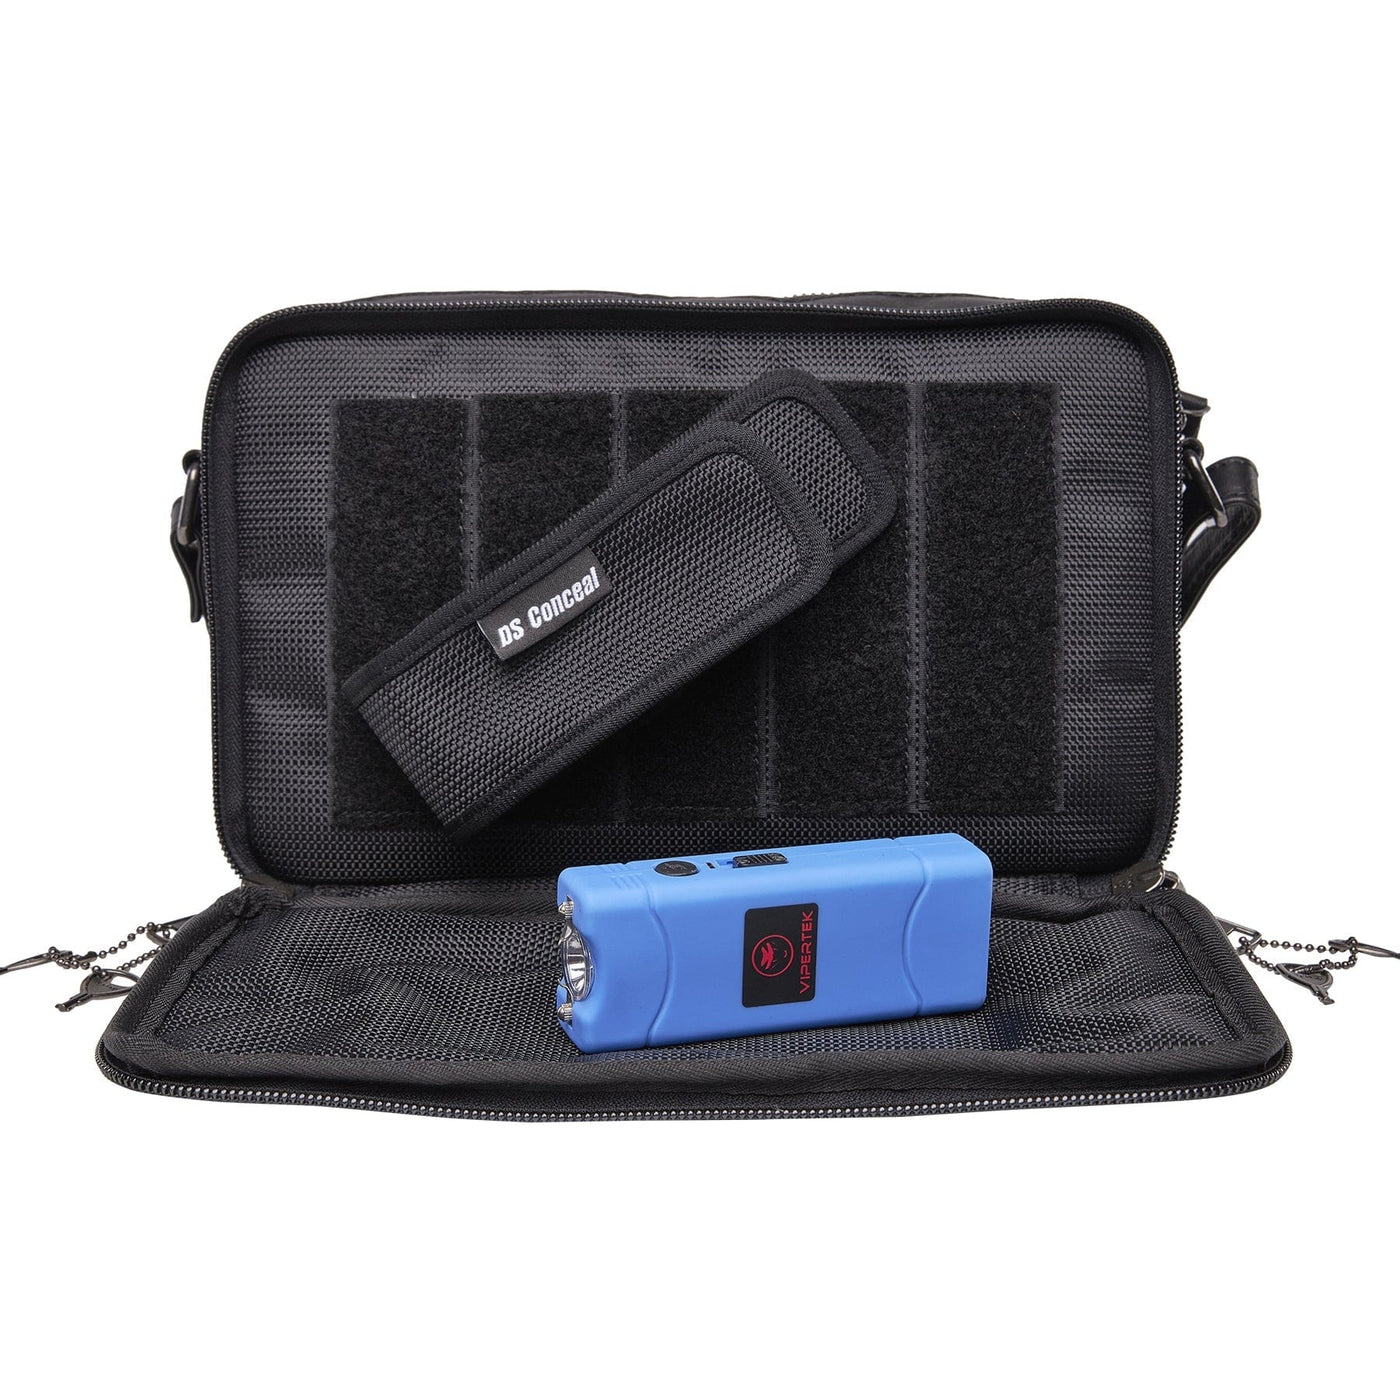 DS Conceal Black pepper spray and taser combo